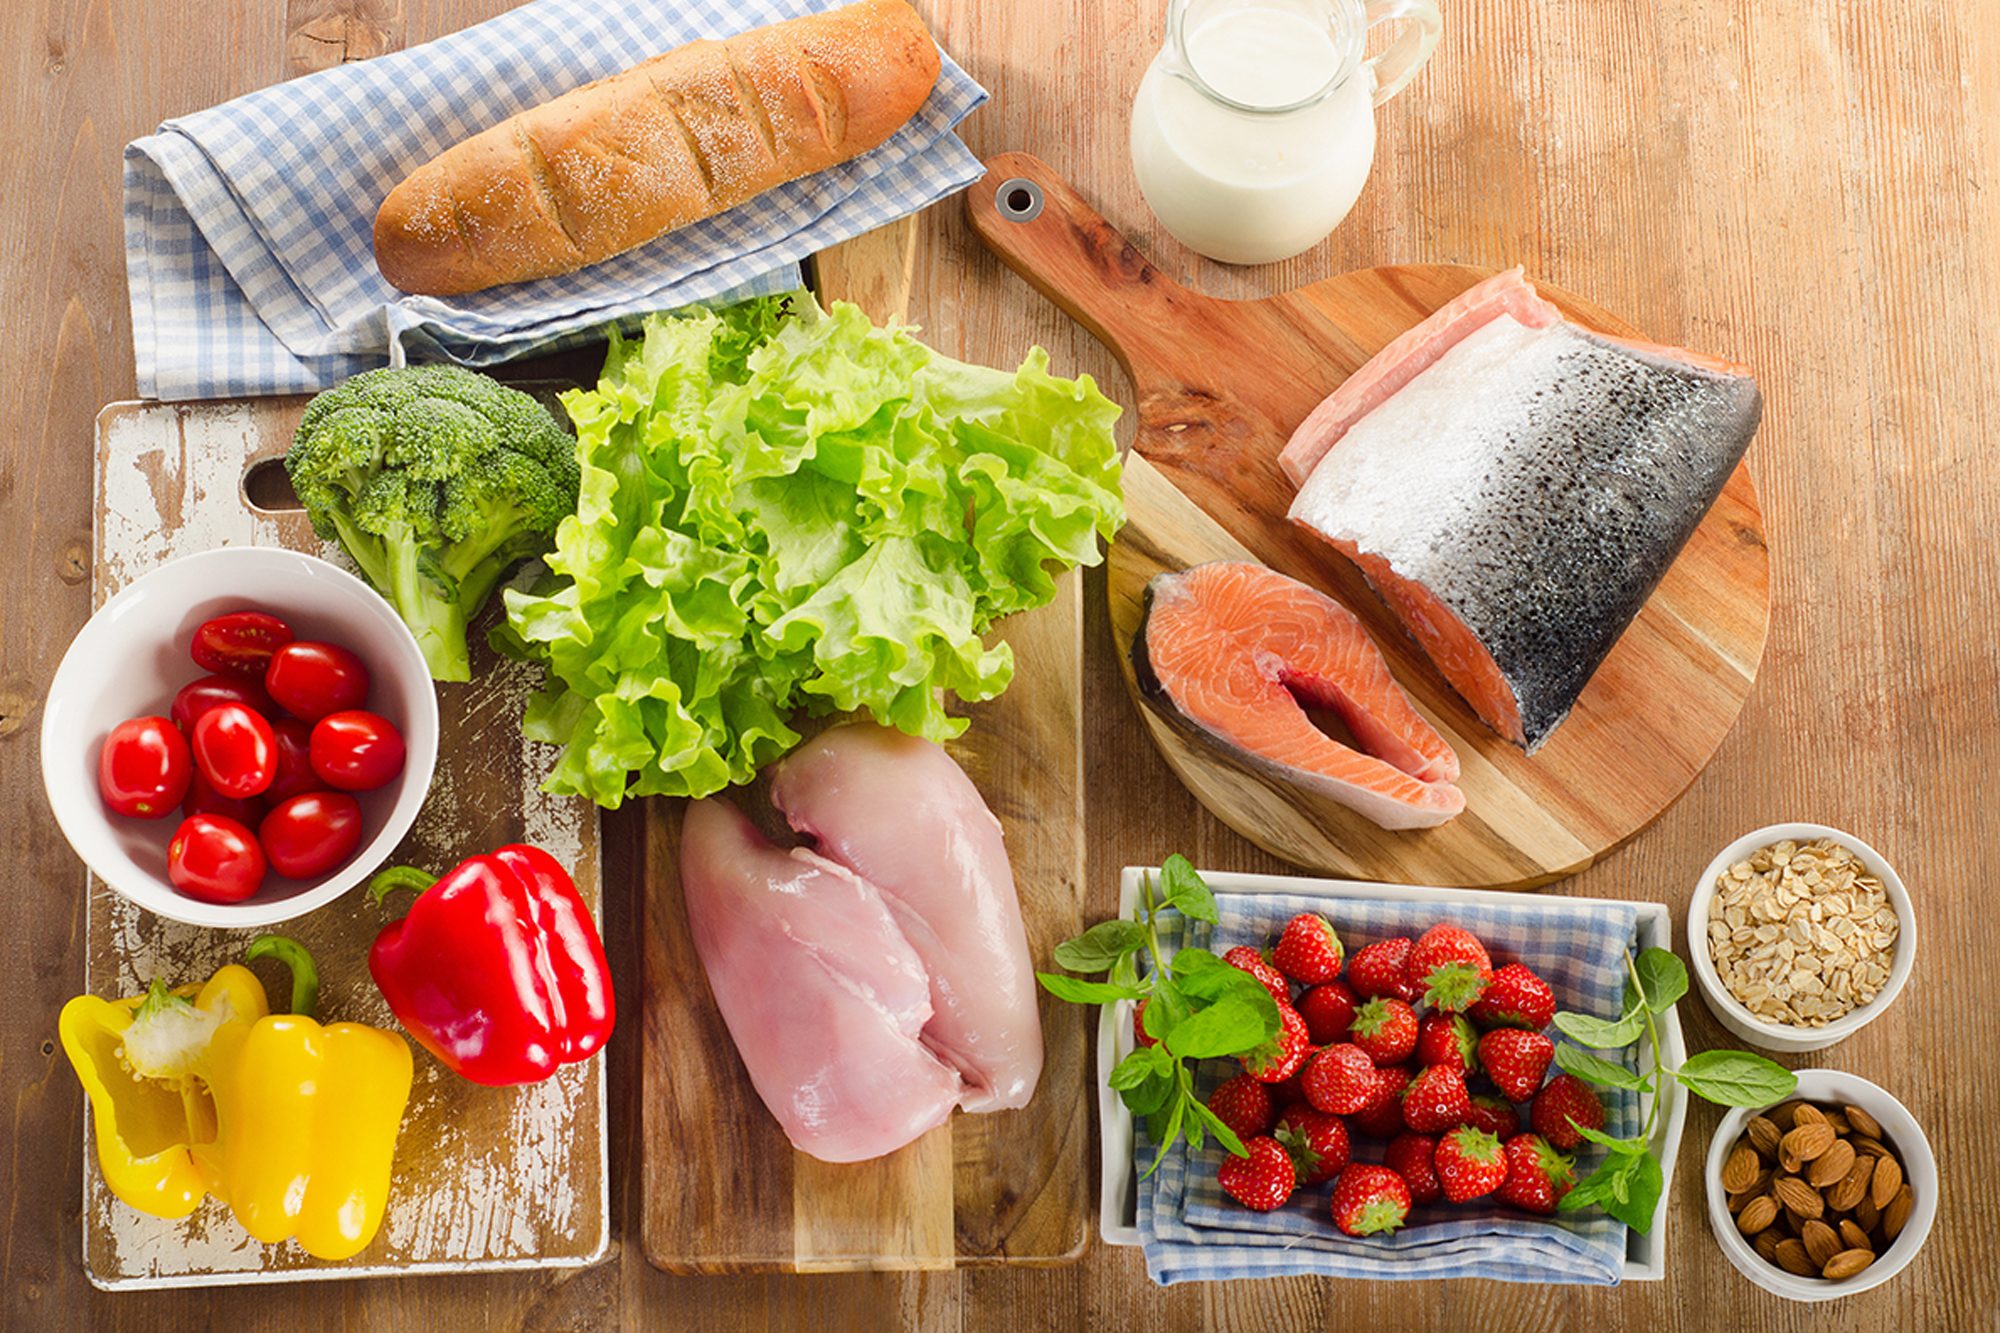 Diet and lifestyle measures that can reduce your risk of cancer.